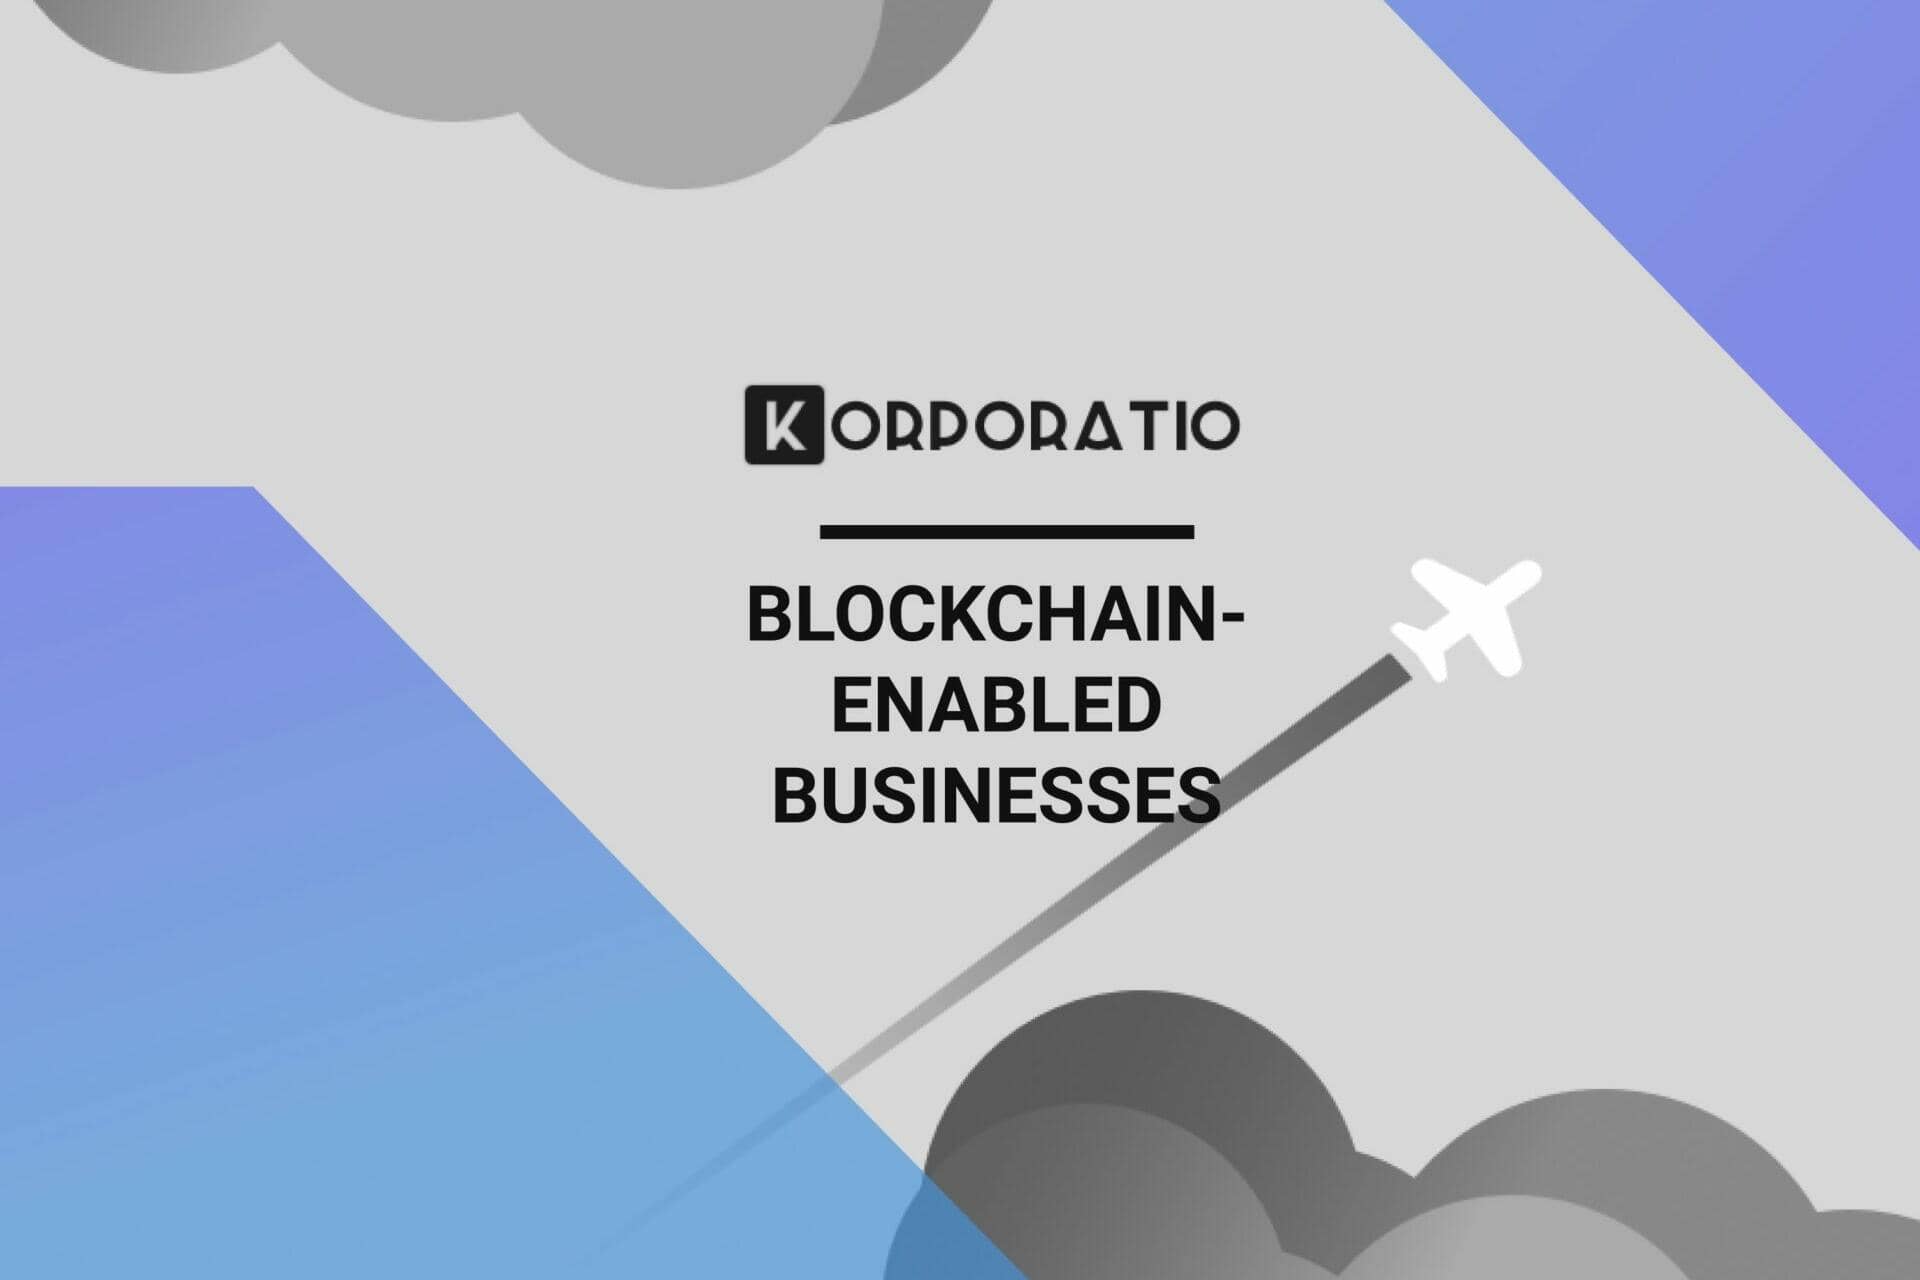 blockchain-enabled businesses